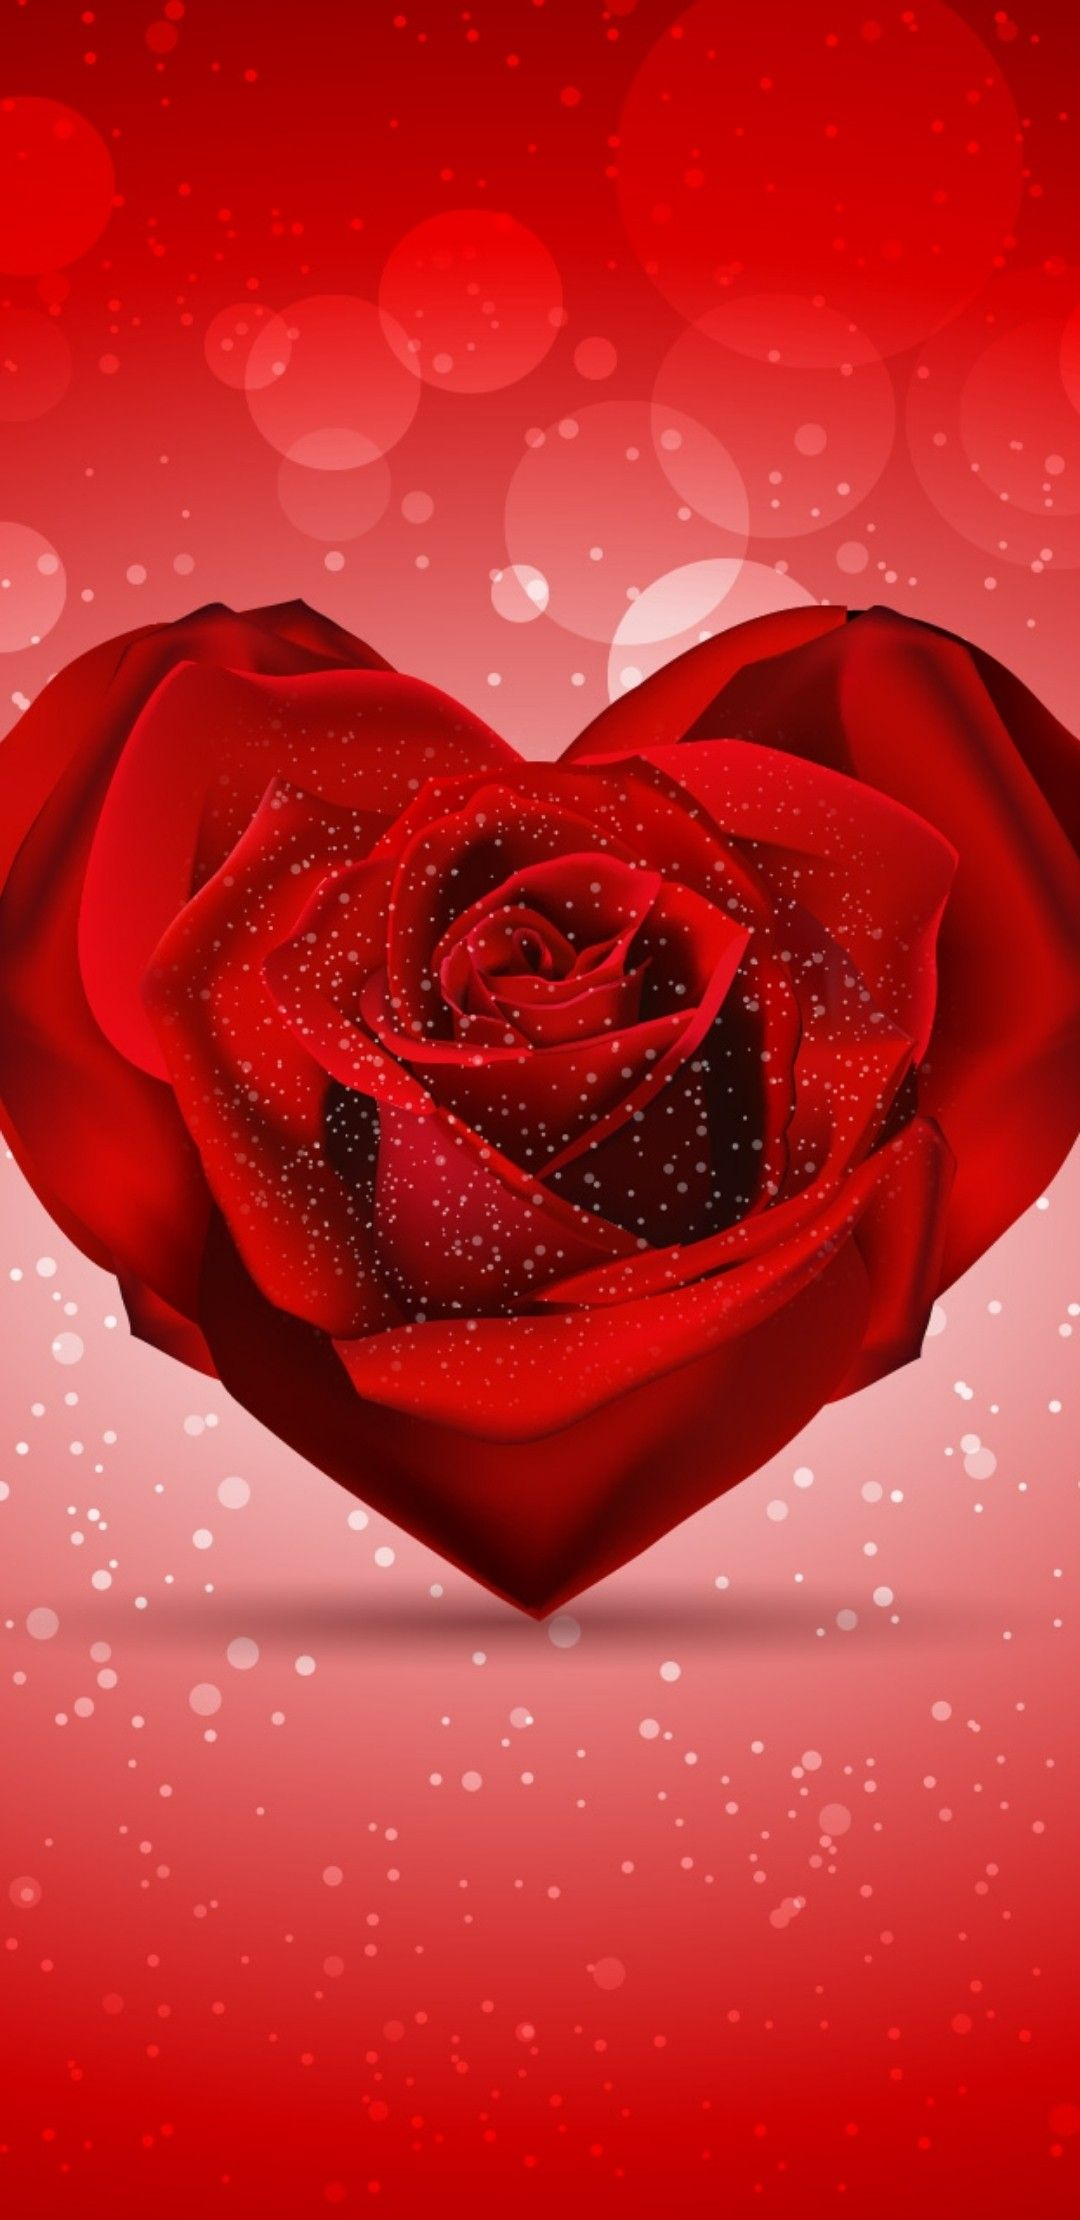 1080x2220 Pin by NicoleMaree77 on Roses Wallpaper 2 | Flower phone wallpaper, Love wallpaper backgrounds, Heart wallpaper